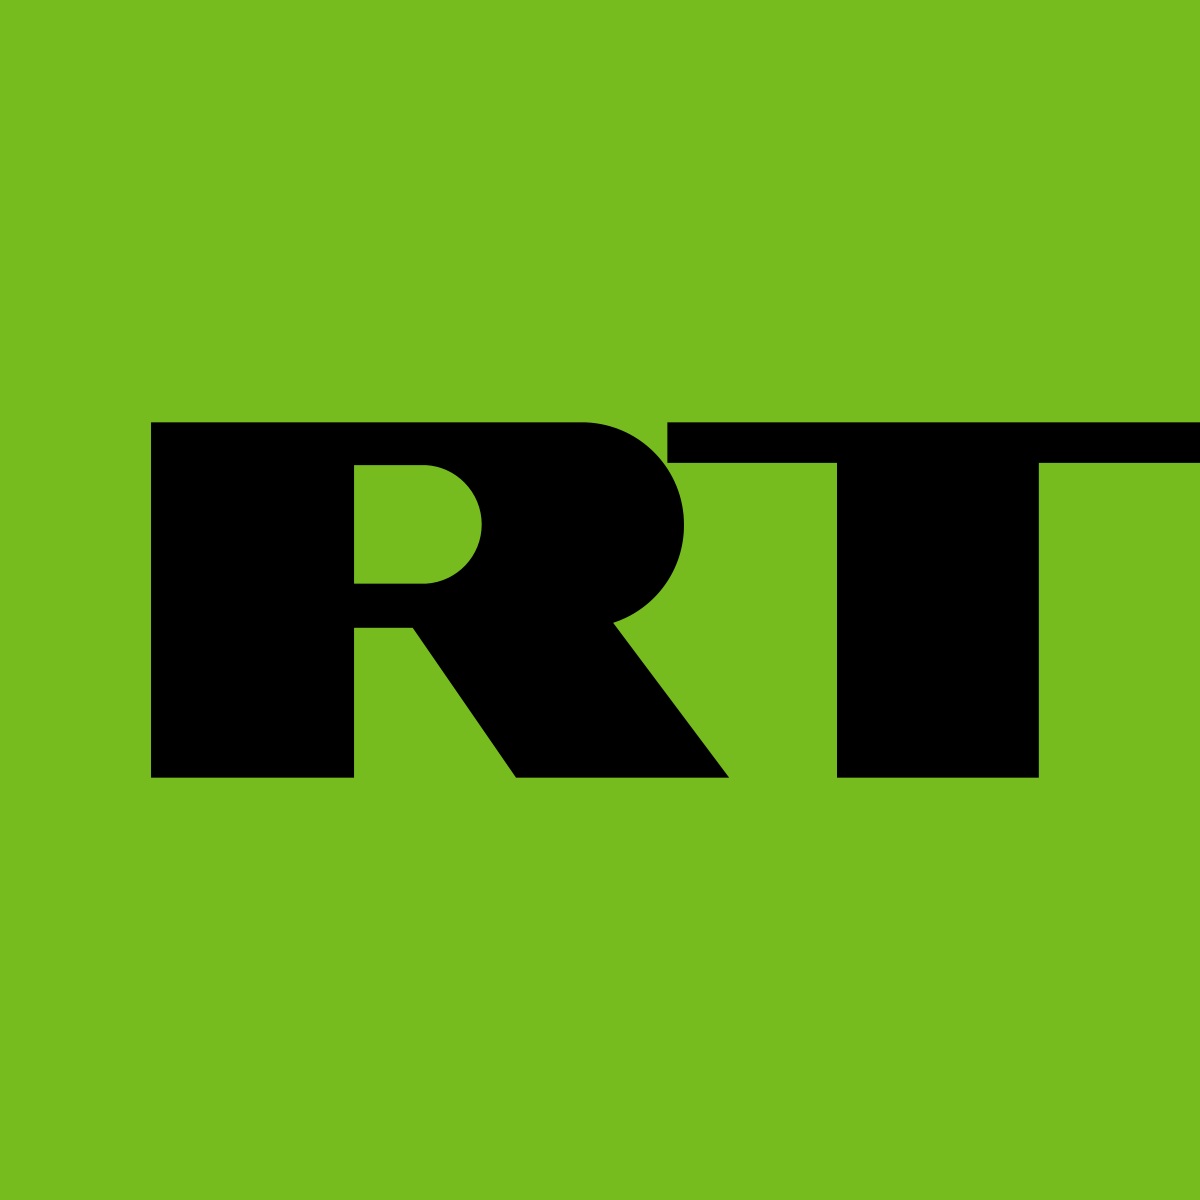 Russia Today, a state-controlled news agency. 